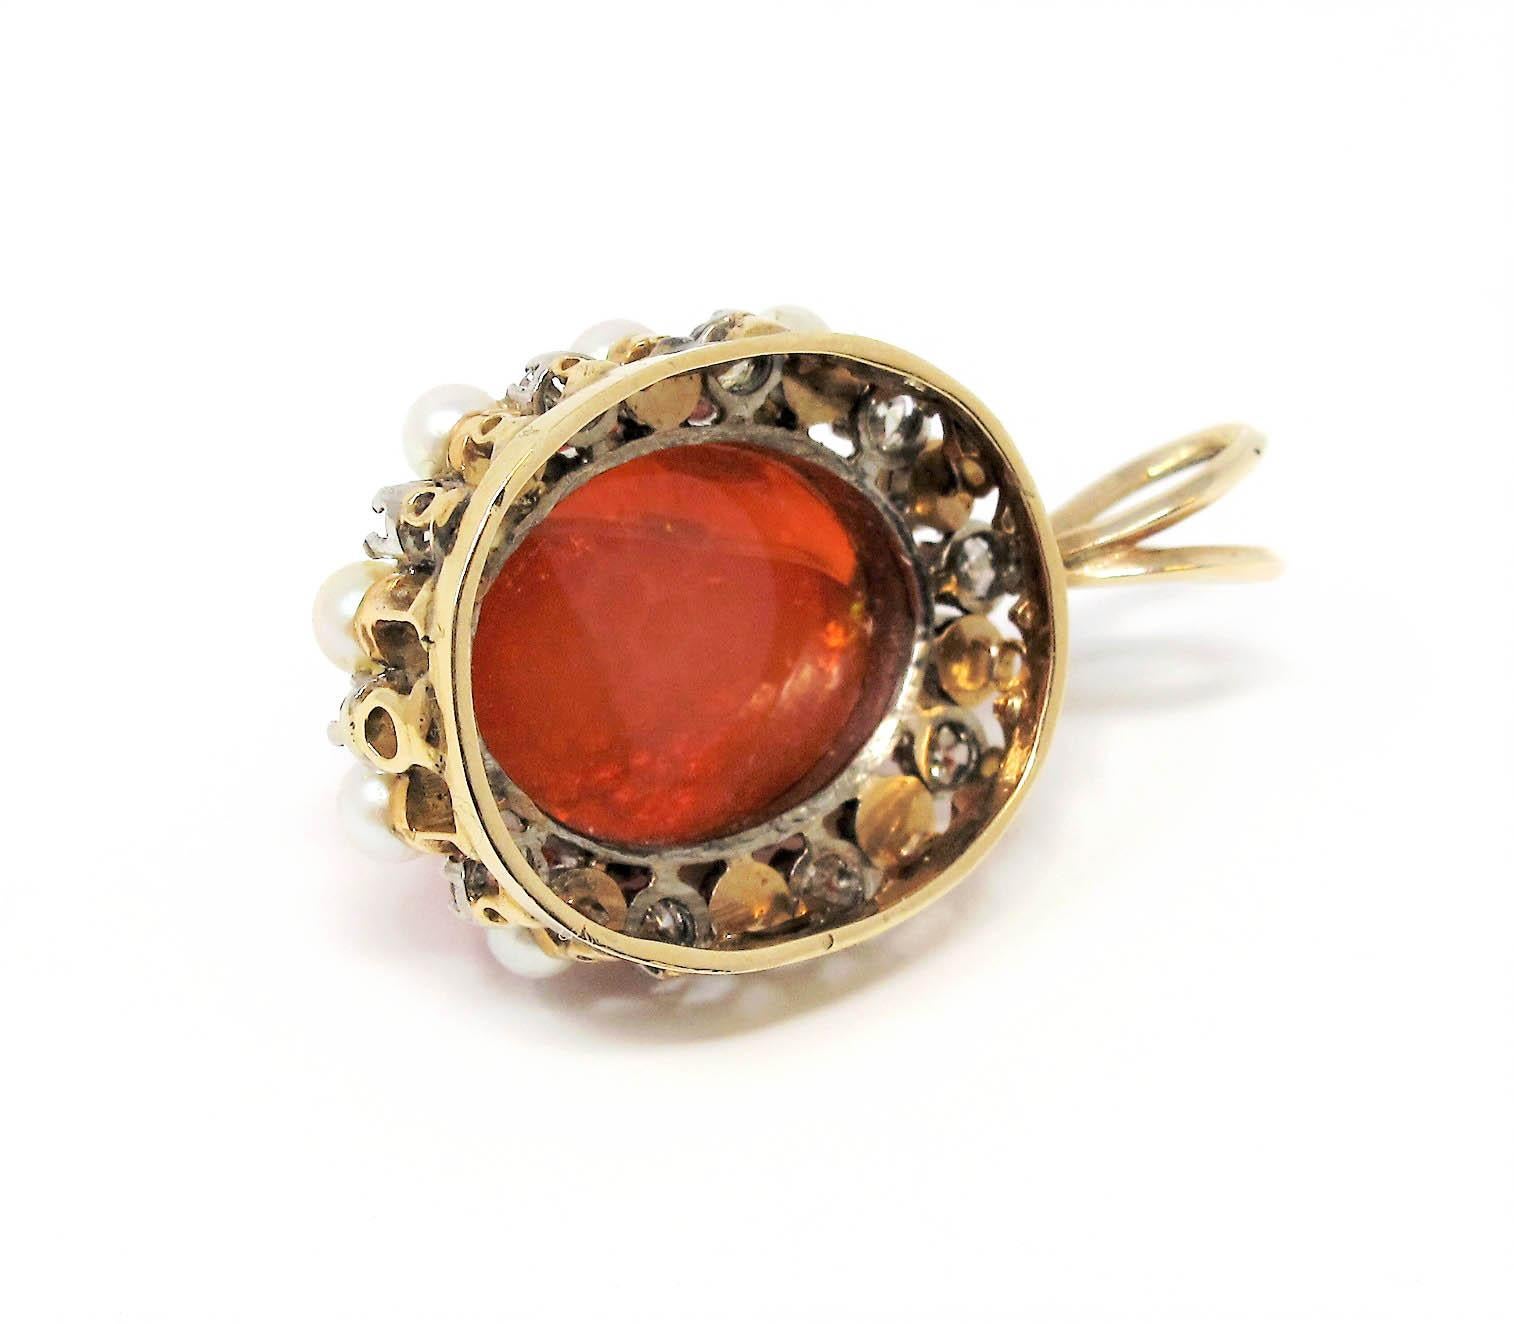 14.71 Carat Cabochon Fire Opal, Pearl and Diamond Halo Pendant 14 Karat Gold In Fair Condition For Sale In Scottsdale, AZ